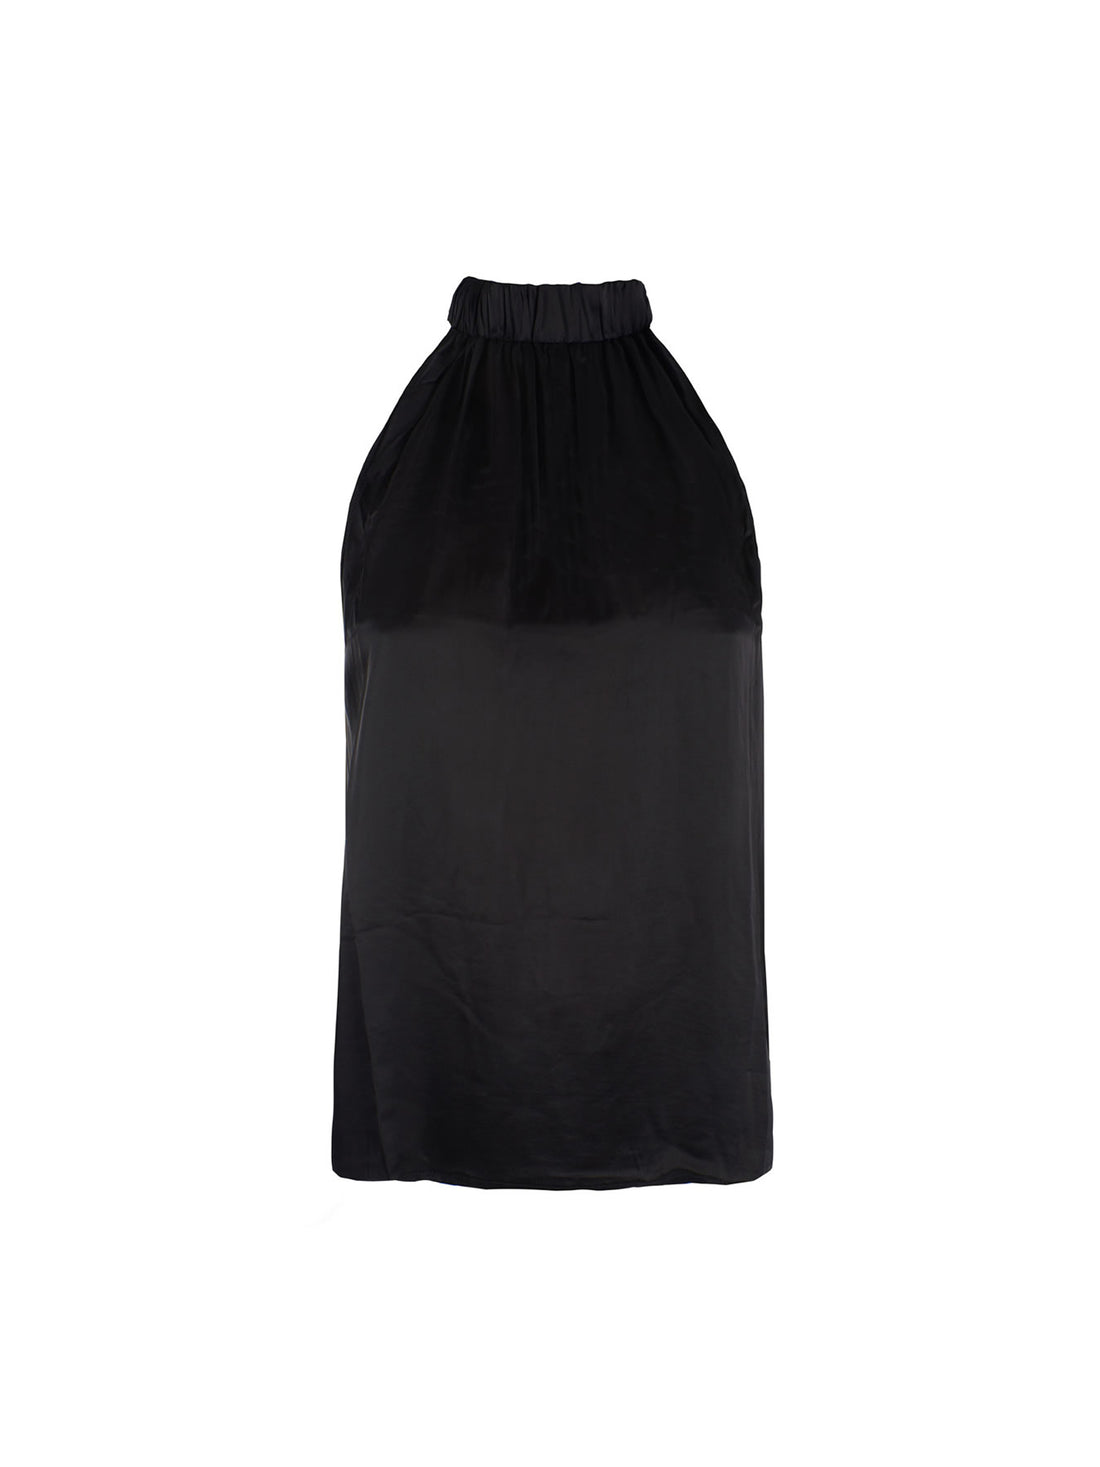 Top e canotte Nero Yes-zee